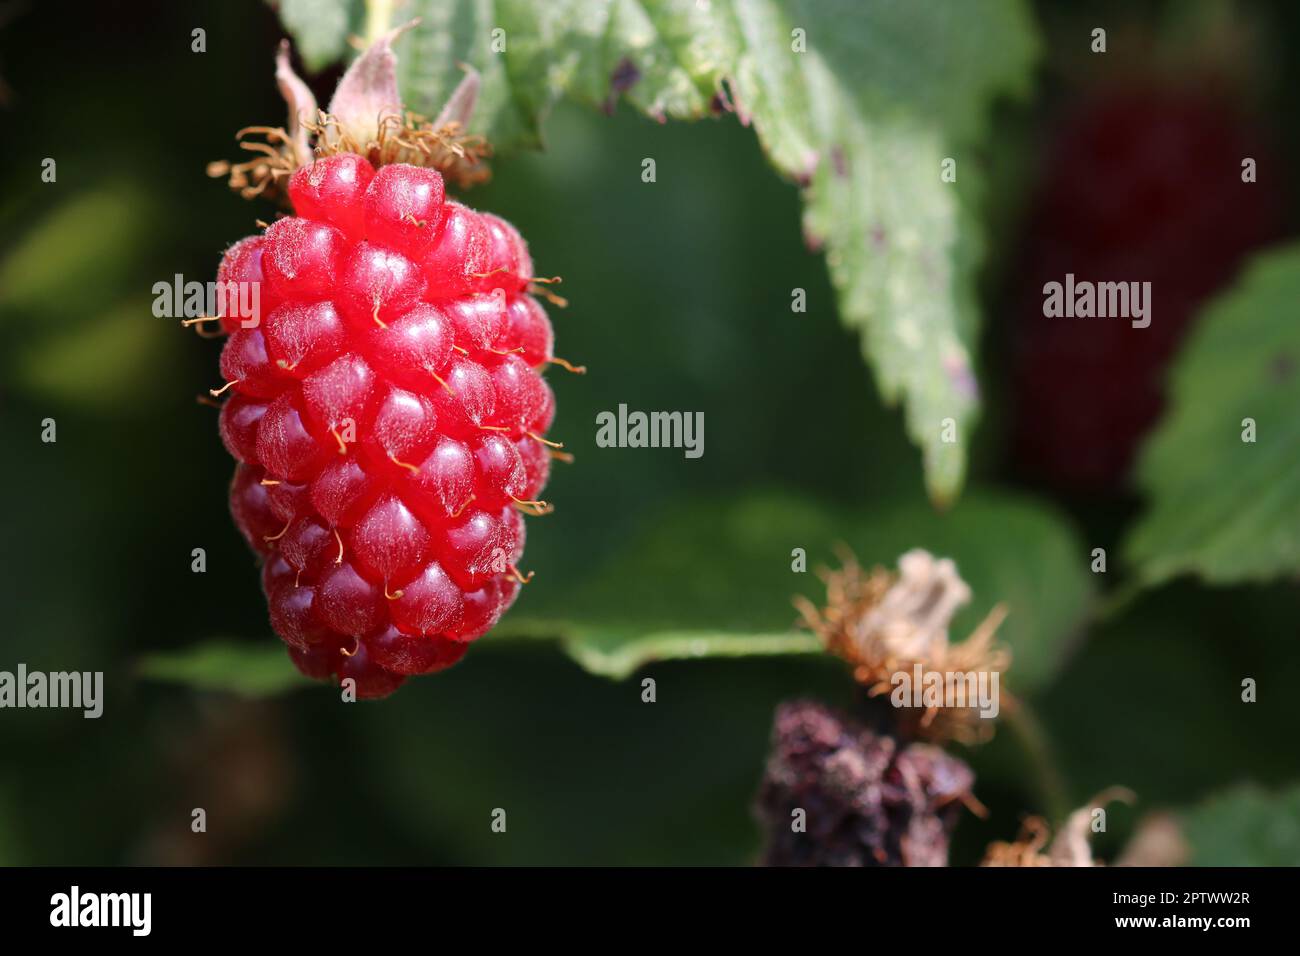 Cultivated ripe red tummelberry, Rubus hybrid, fruit in close up, on the bush with a background of blurred leaves. Stock Photo